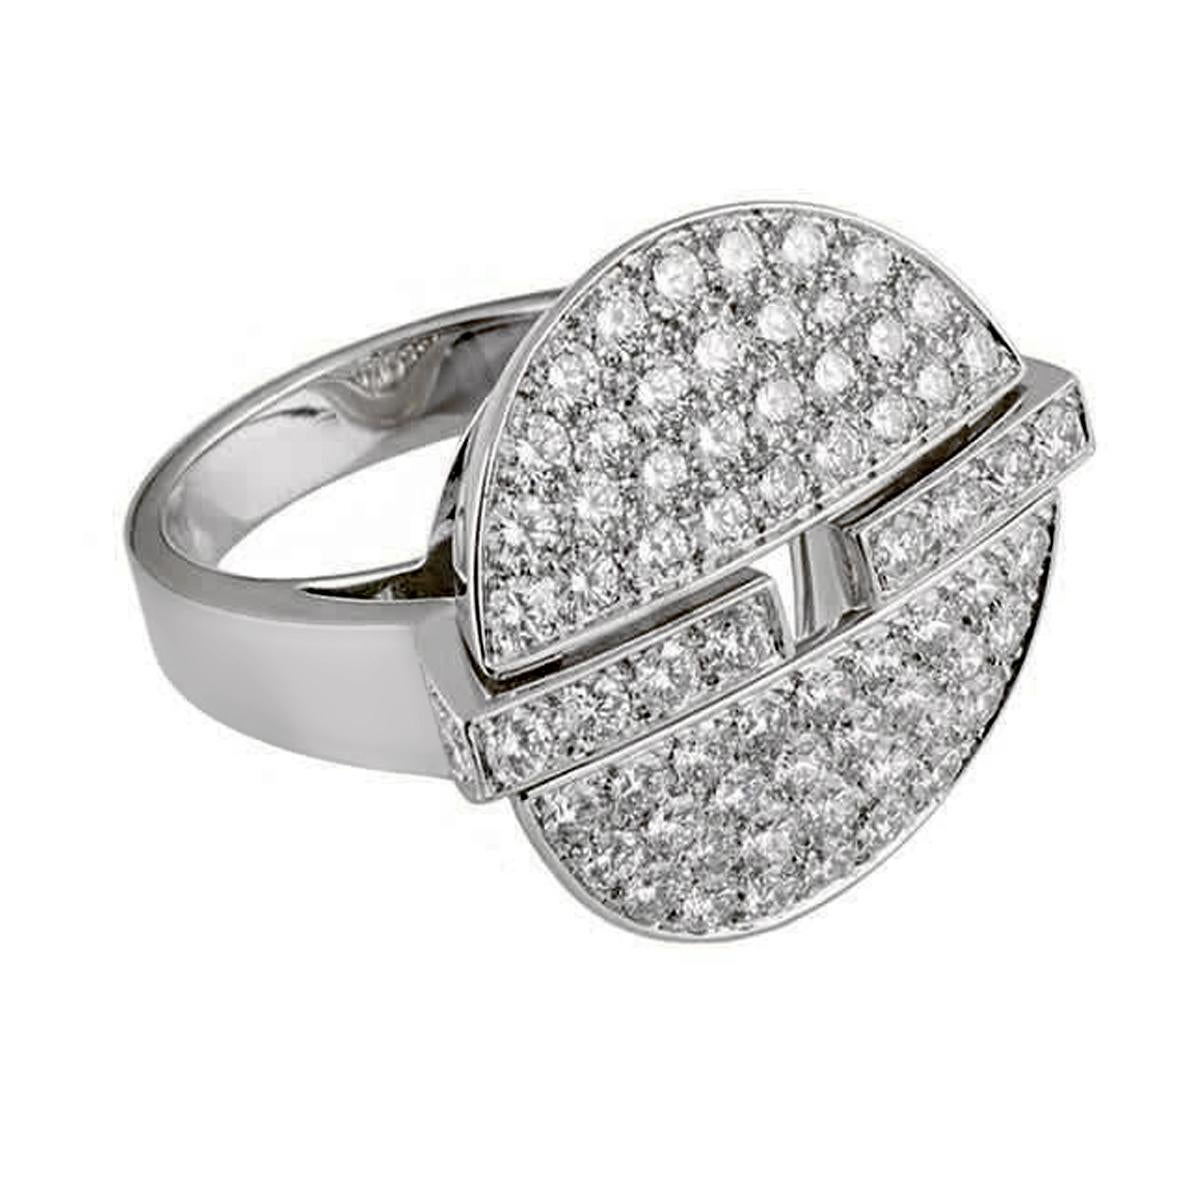 A magnificent Cartier Himalia diamond ring paved with 72 of the finest Cartier round brilliant cut diamonds set in shimmering 18k white gold. The ring measures a size 5 1/4 and can be resized.